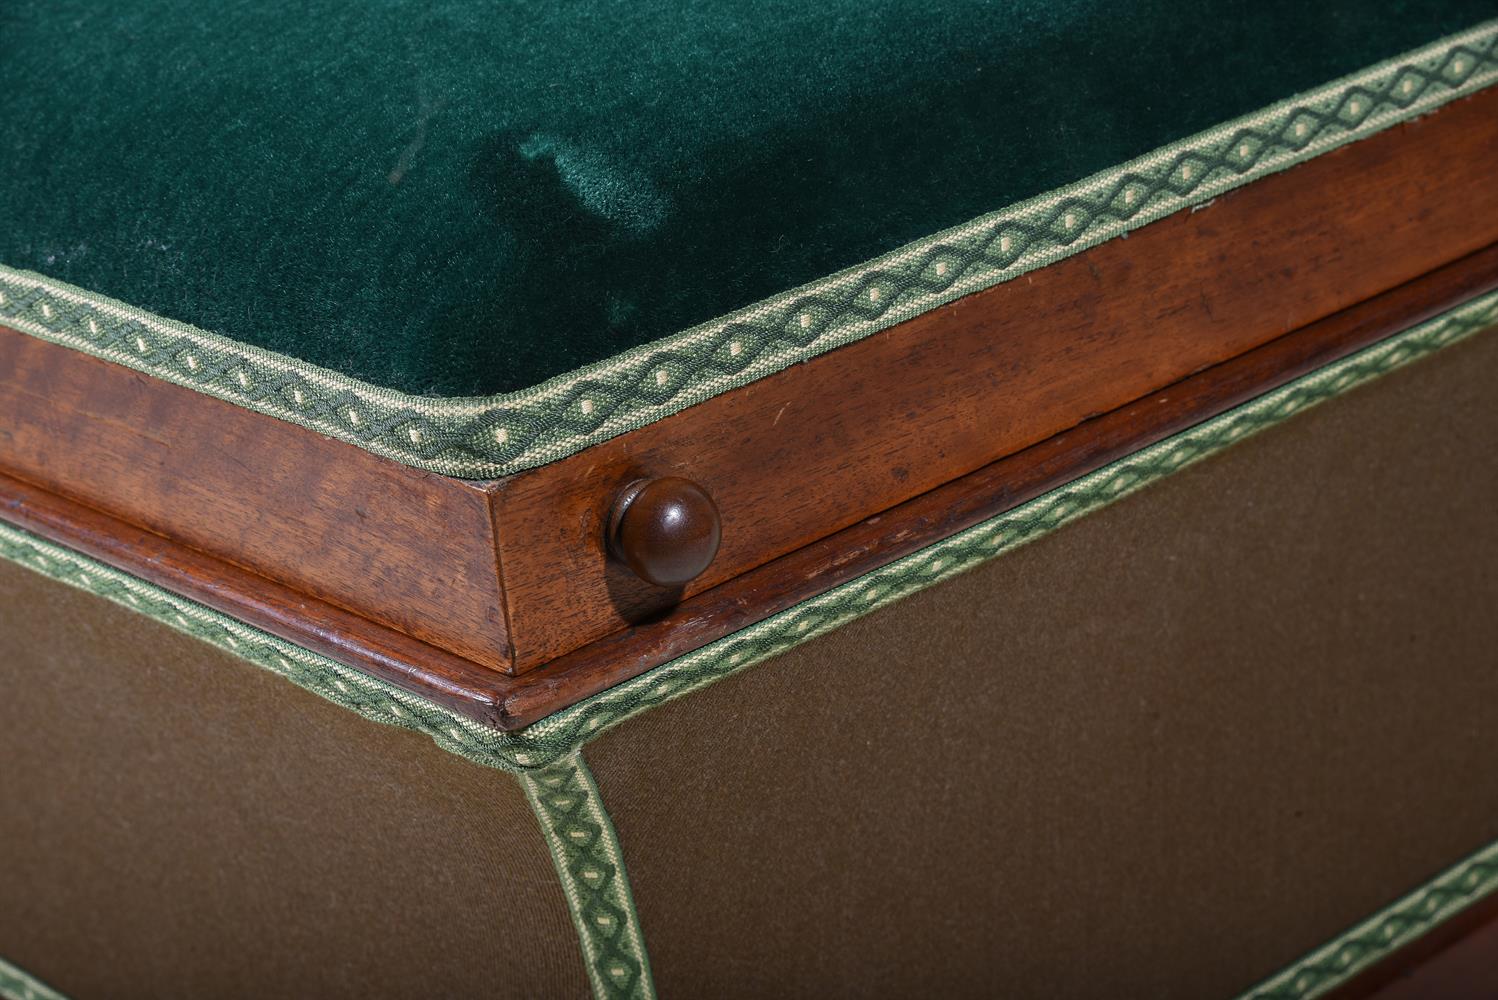 A WILLIAM IV MAHOGANY AND VELVET UPHOLSTERED SARCOPHAGUS SHAPED OTTOMAN, CIRCA 1835 - Image 2 of 3